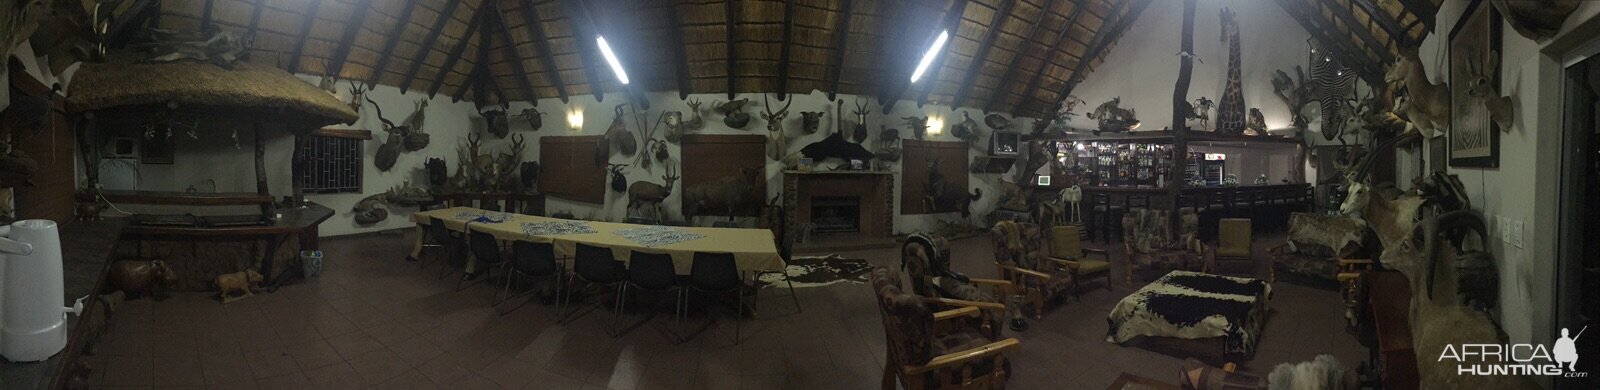 Hunting South Africa Accommodation